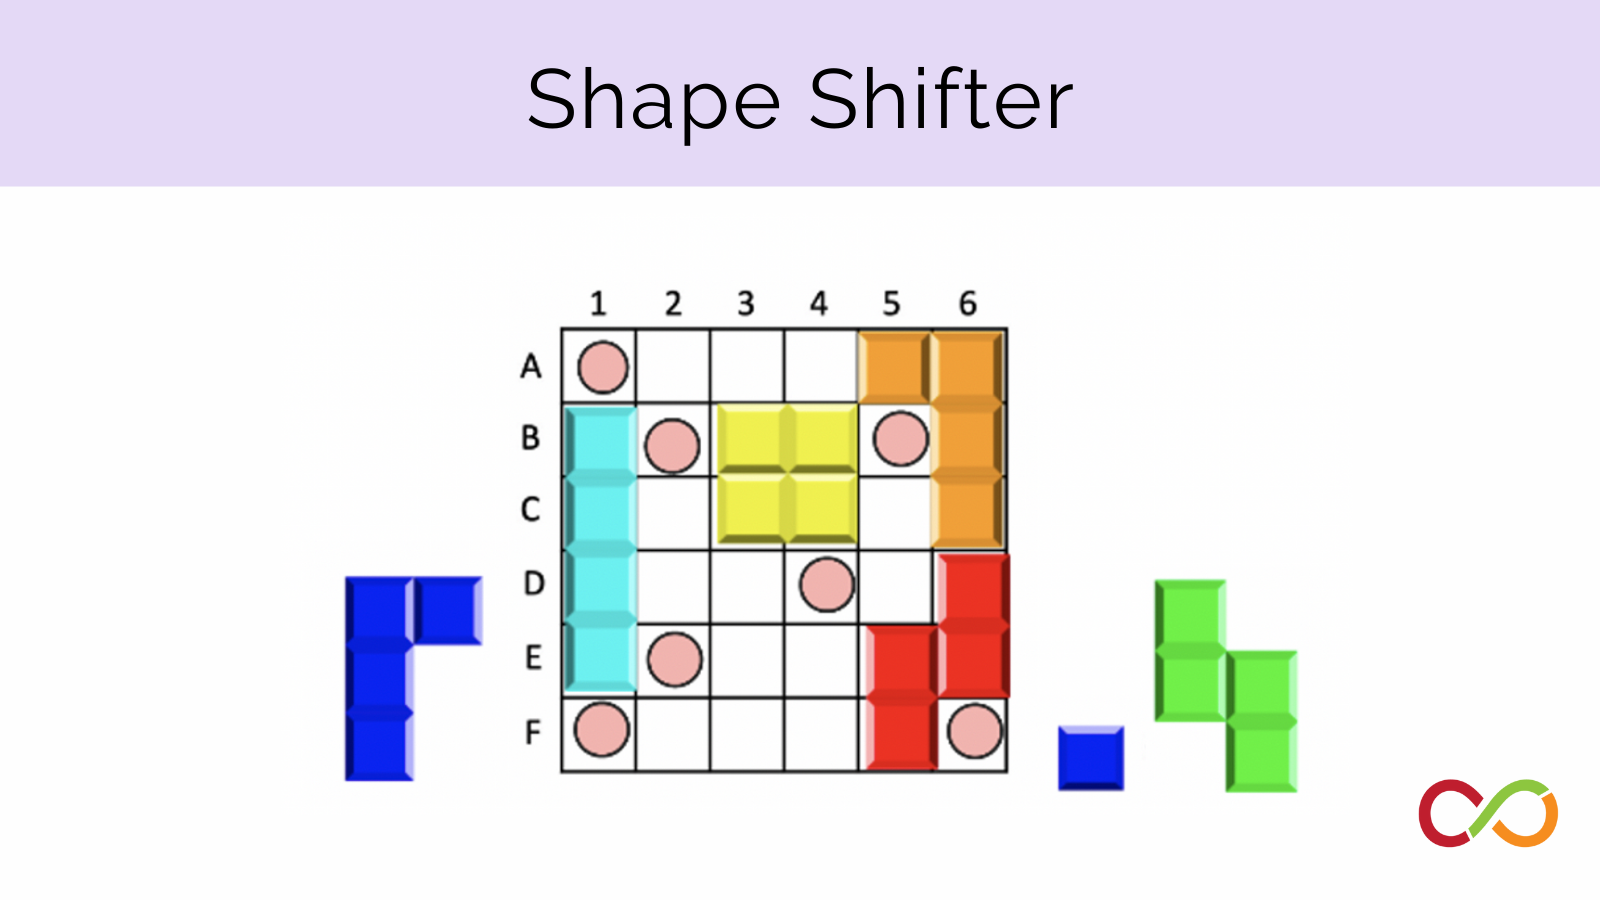 An image linking to the Shape Shifter lesson